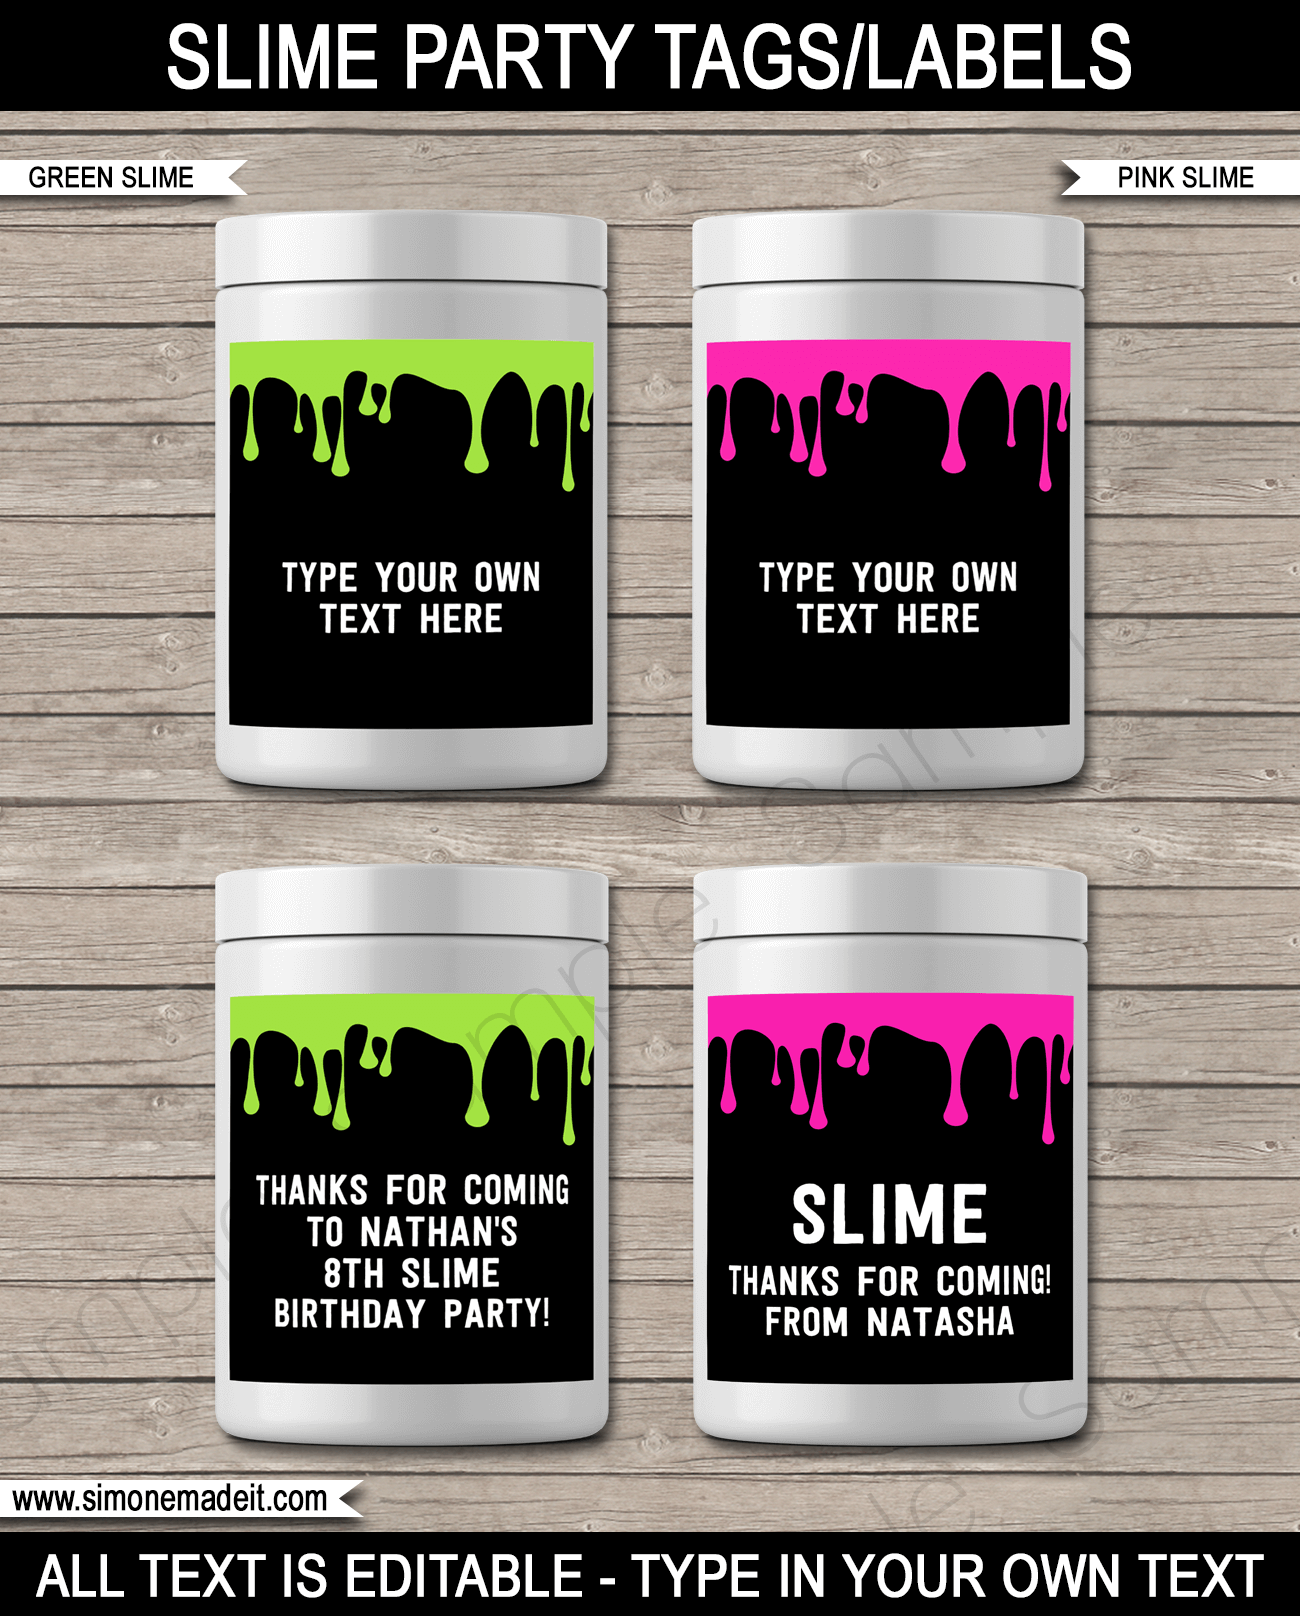 Slime theme birthday party favors  - party tags